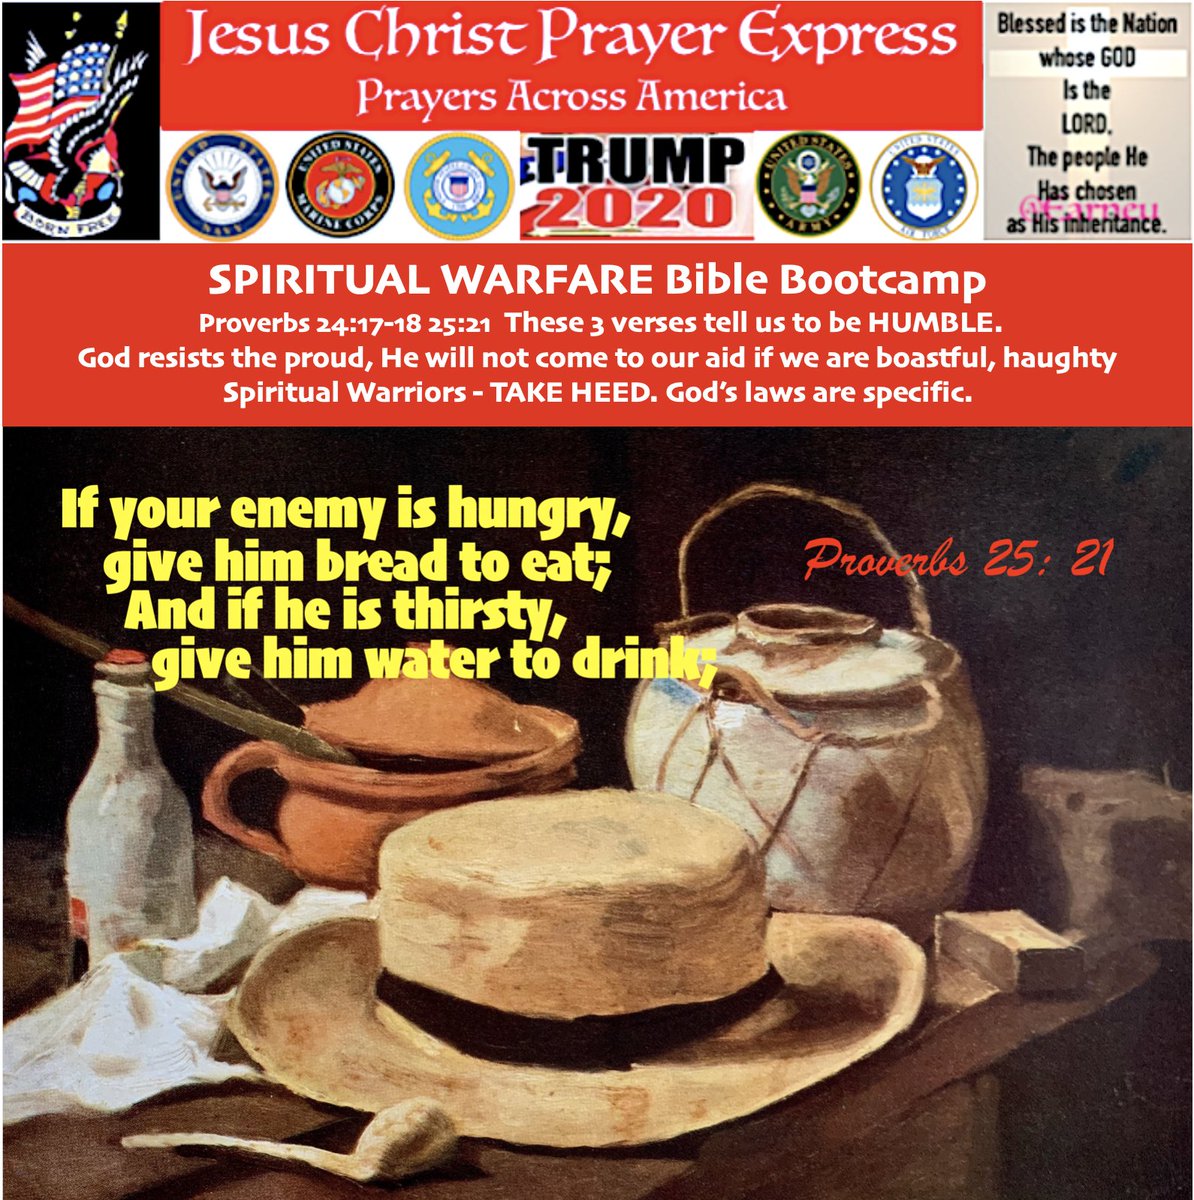 Jesus Christ Prayer Express  #JCPE4.SPIRITUAL WARFARE EDITION- ALL: PLS READ FROM TOP TO THIS #4 to understand what this JCPE run is about: @Sam2323_43433  @Nobodybutme17  @RadioInfidelSho  @scouter12  @T67562897  @TheyCallMeDoc1  @justRon13  @SteveDesi  @mulko_martha  @Maddie412412